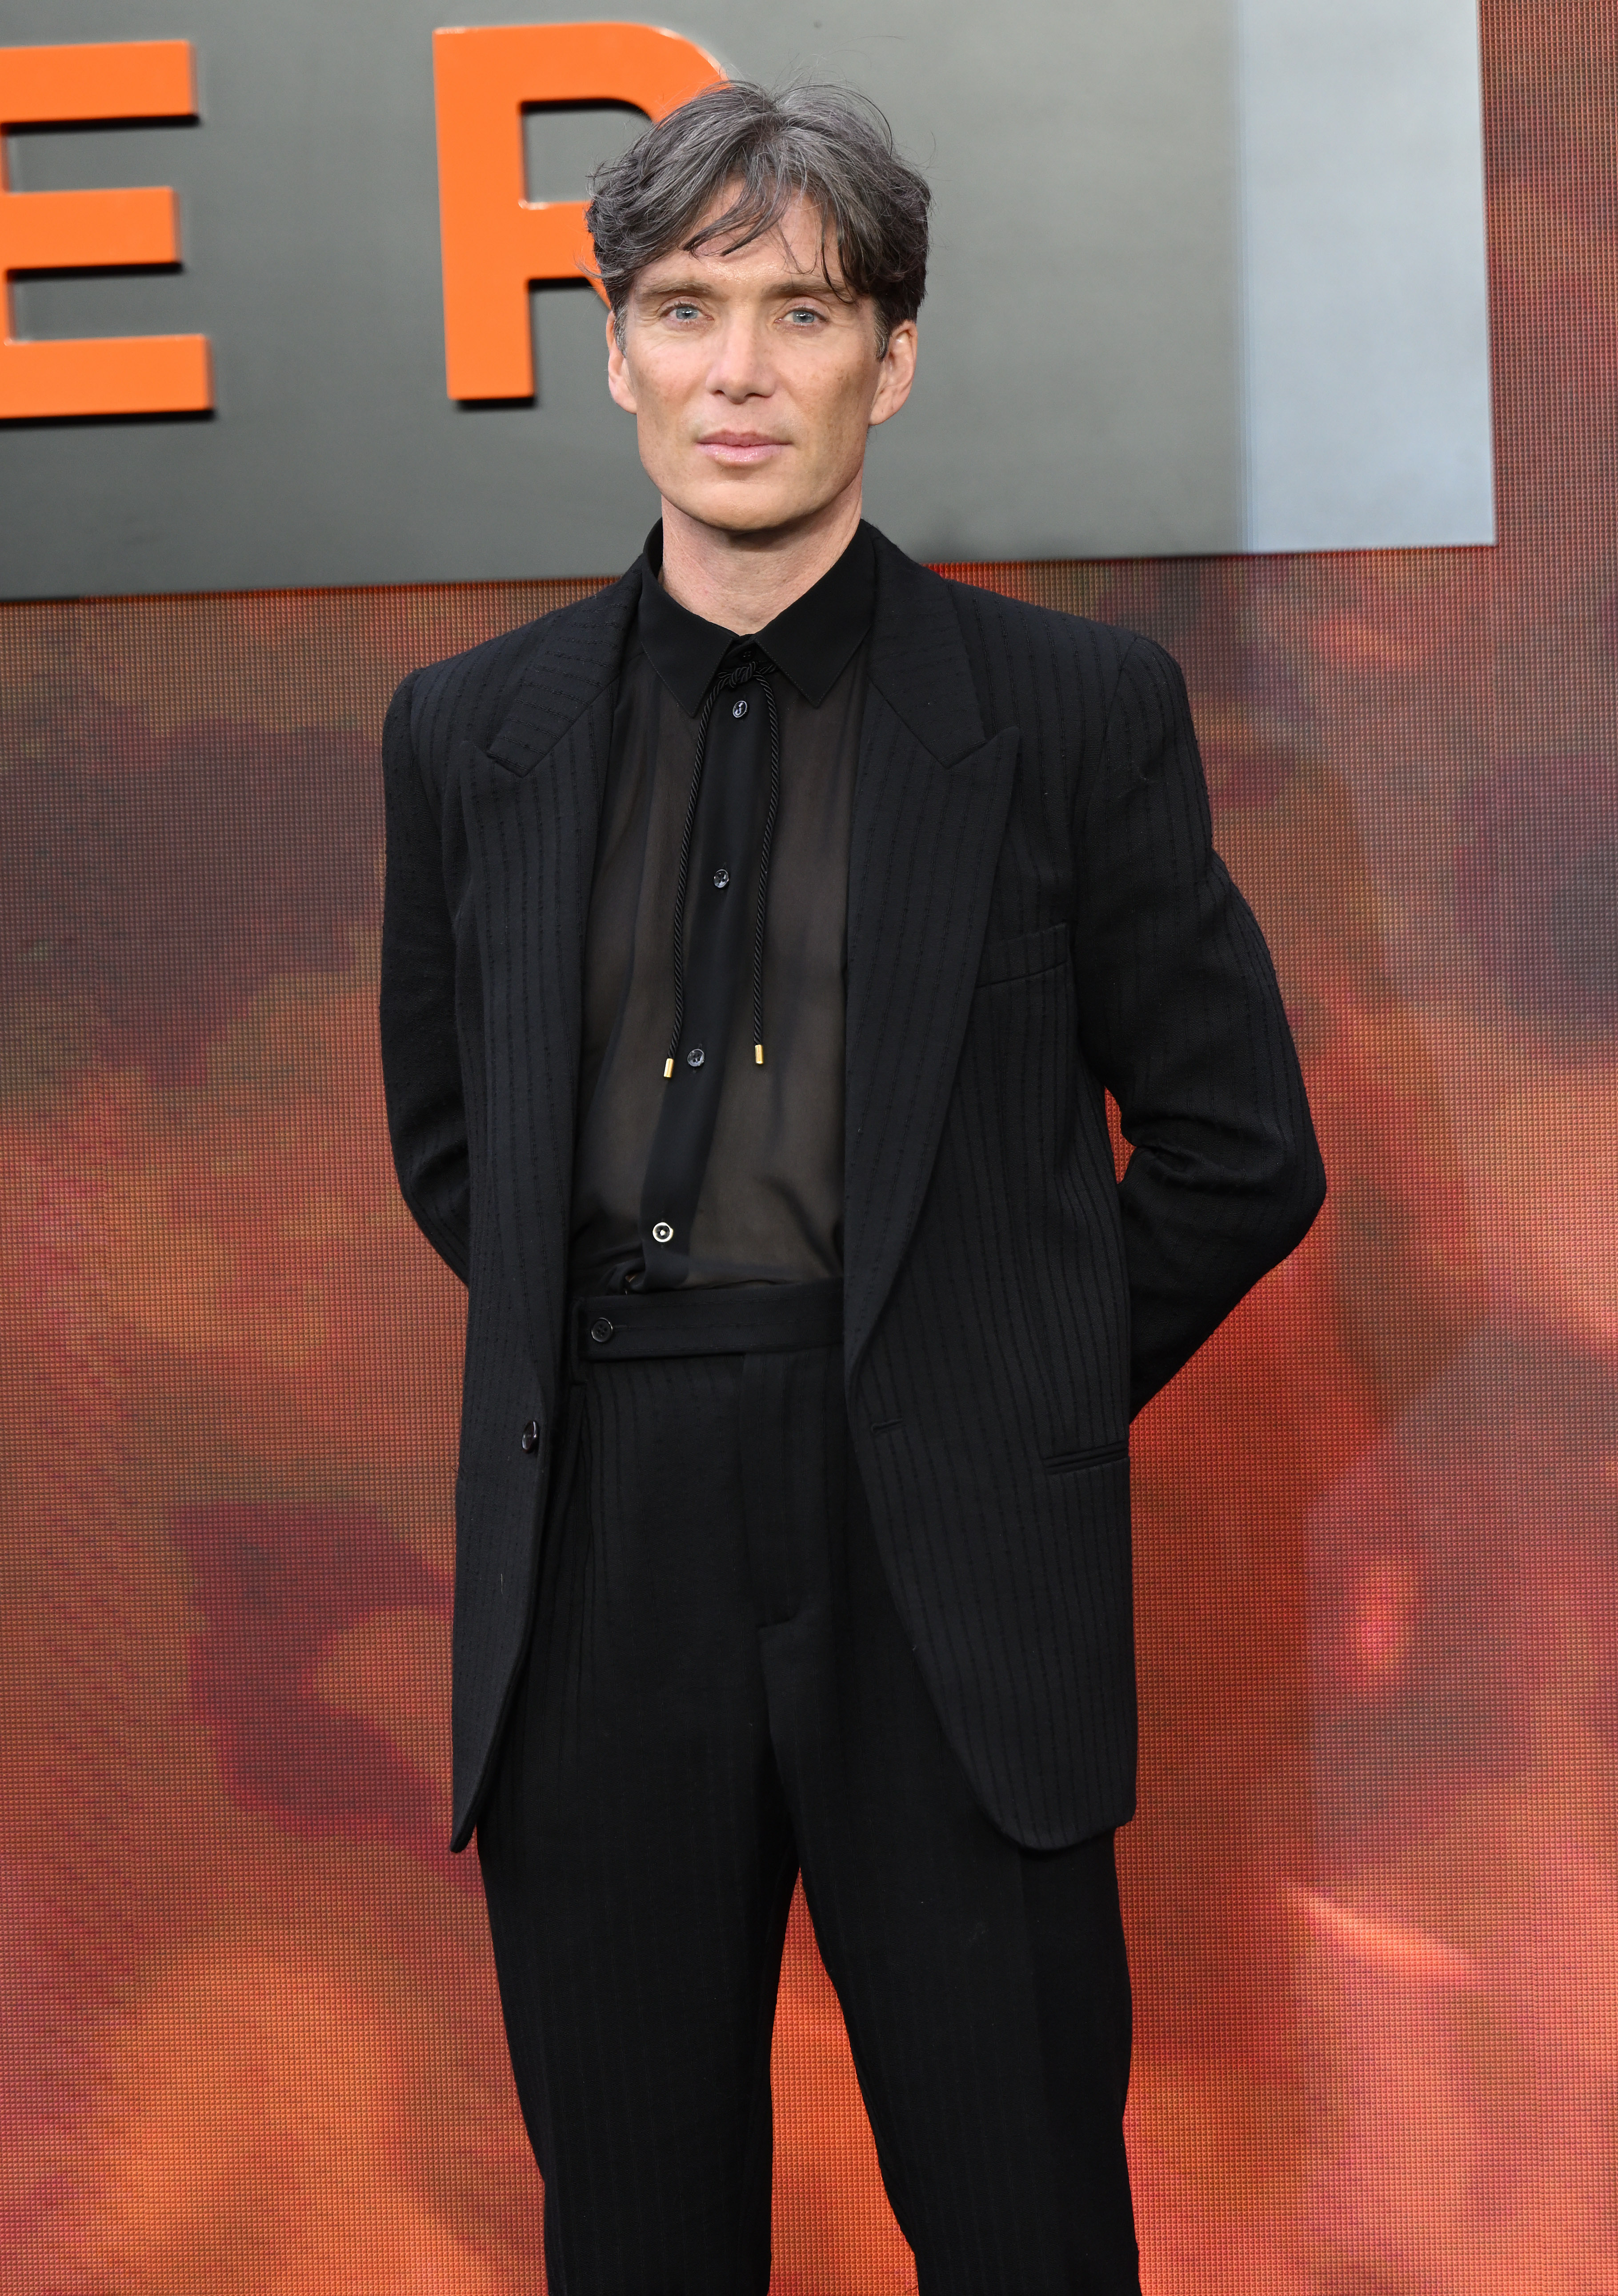 Cillian Murphy besucht die "Oppenheimer"-UK Premiere im Odeon Luxe Leicester Square in London, England, am 13. Juli 2023. | Quelle: Getty Images